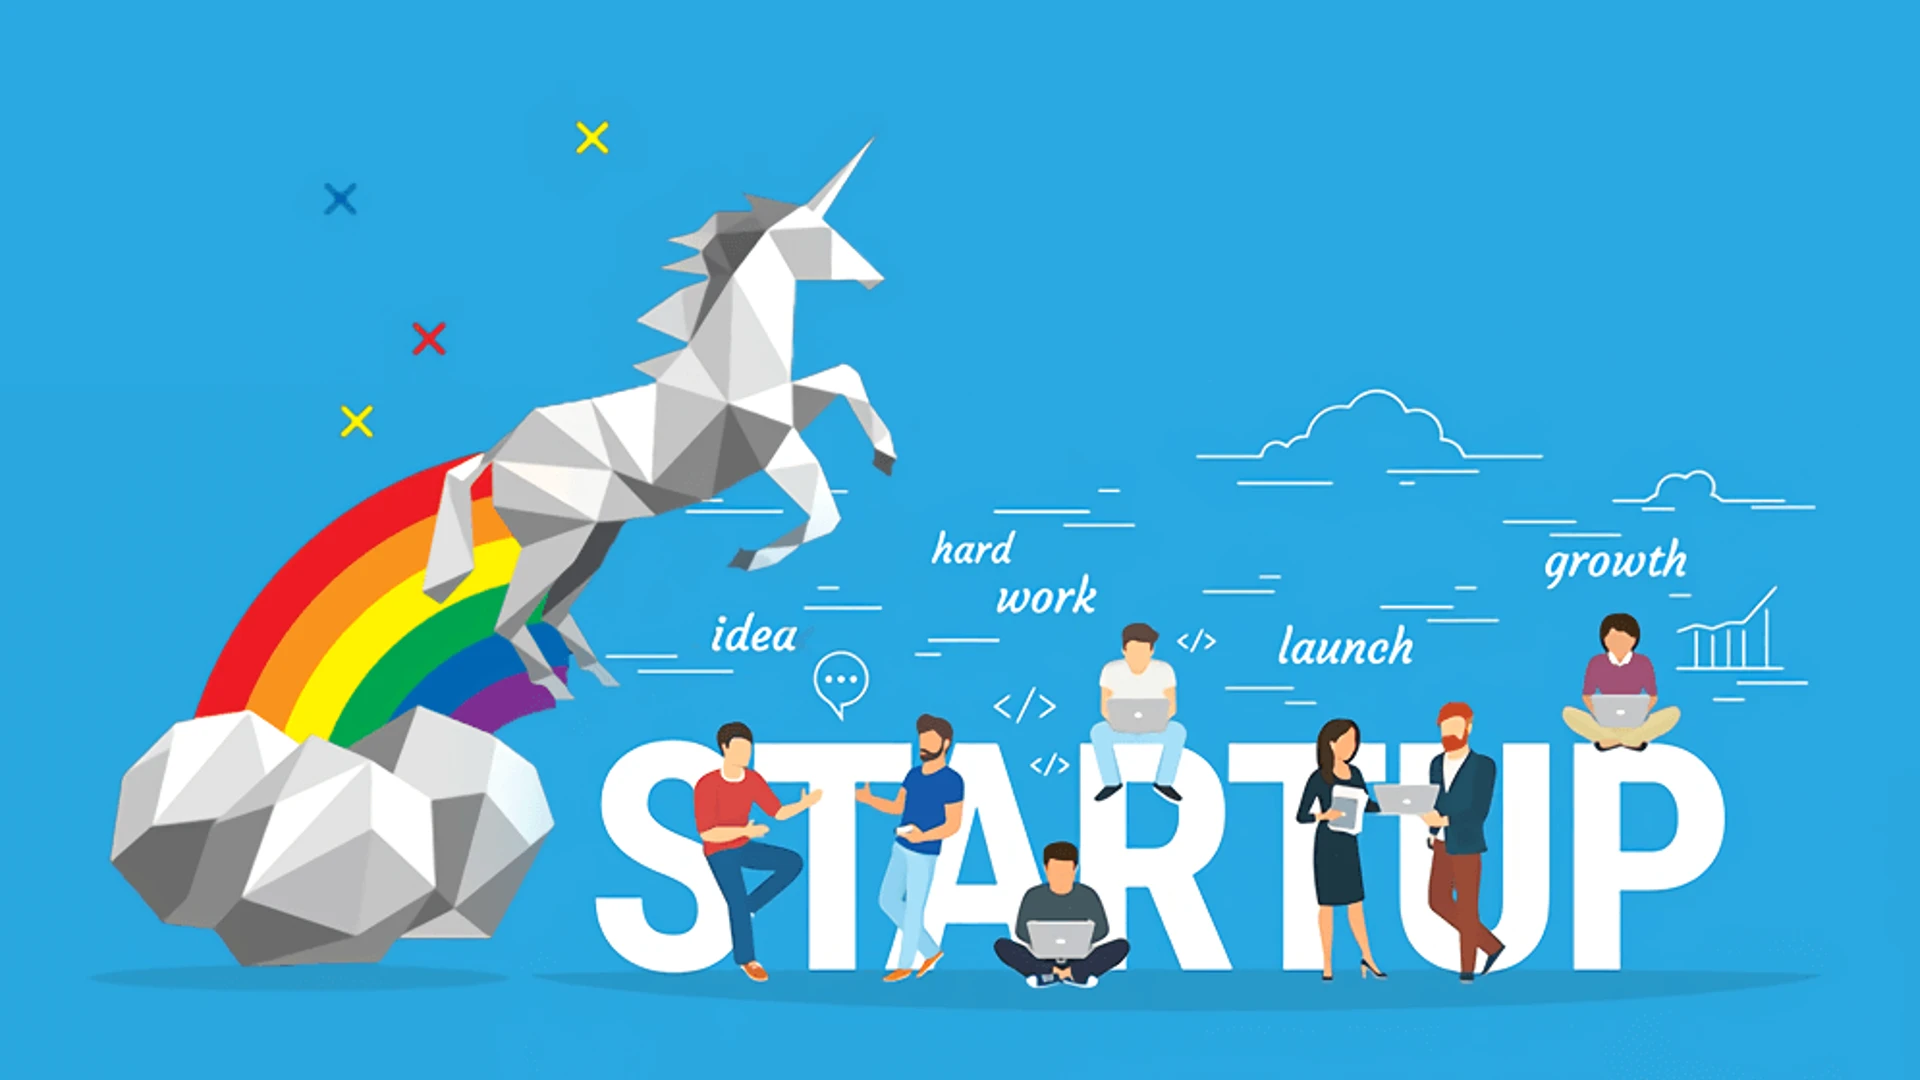 In 2023, Indian startups will most likely become unicorns